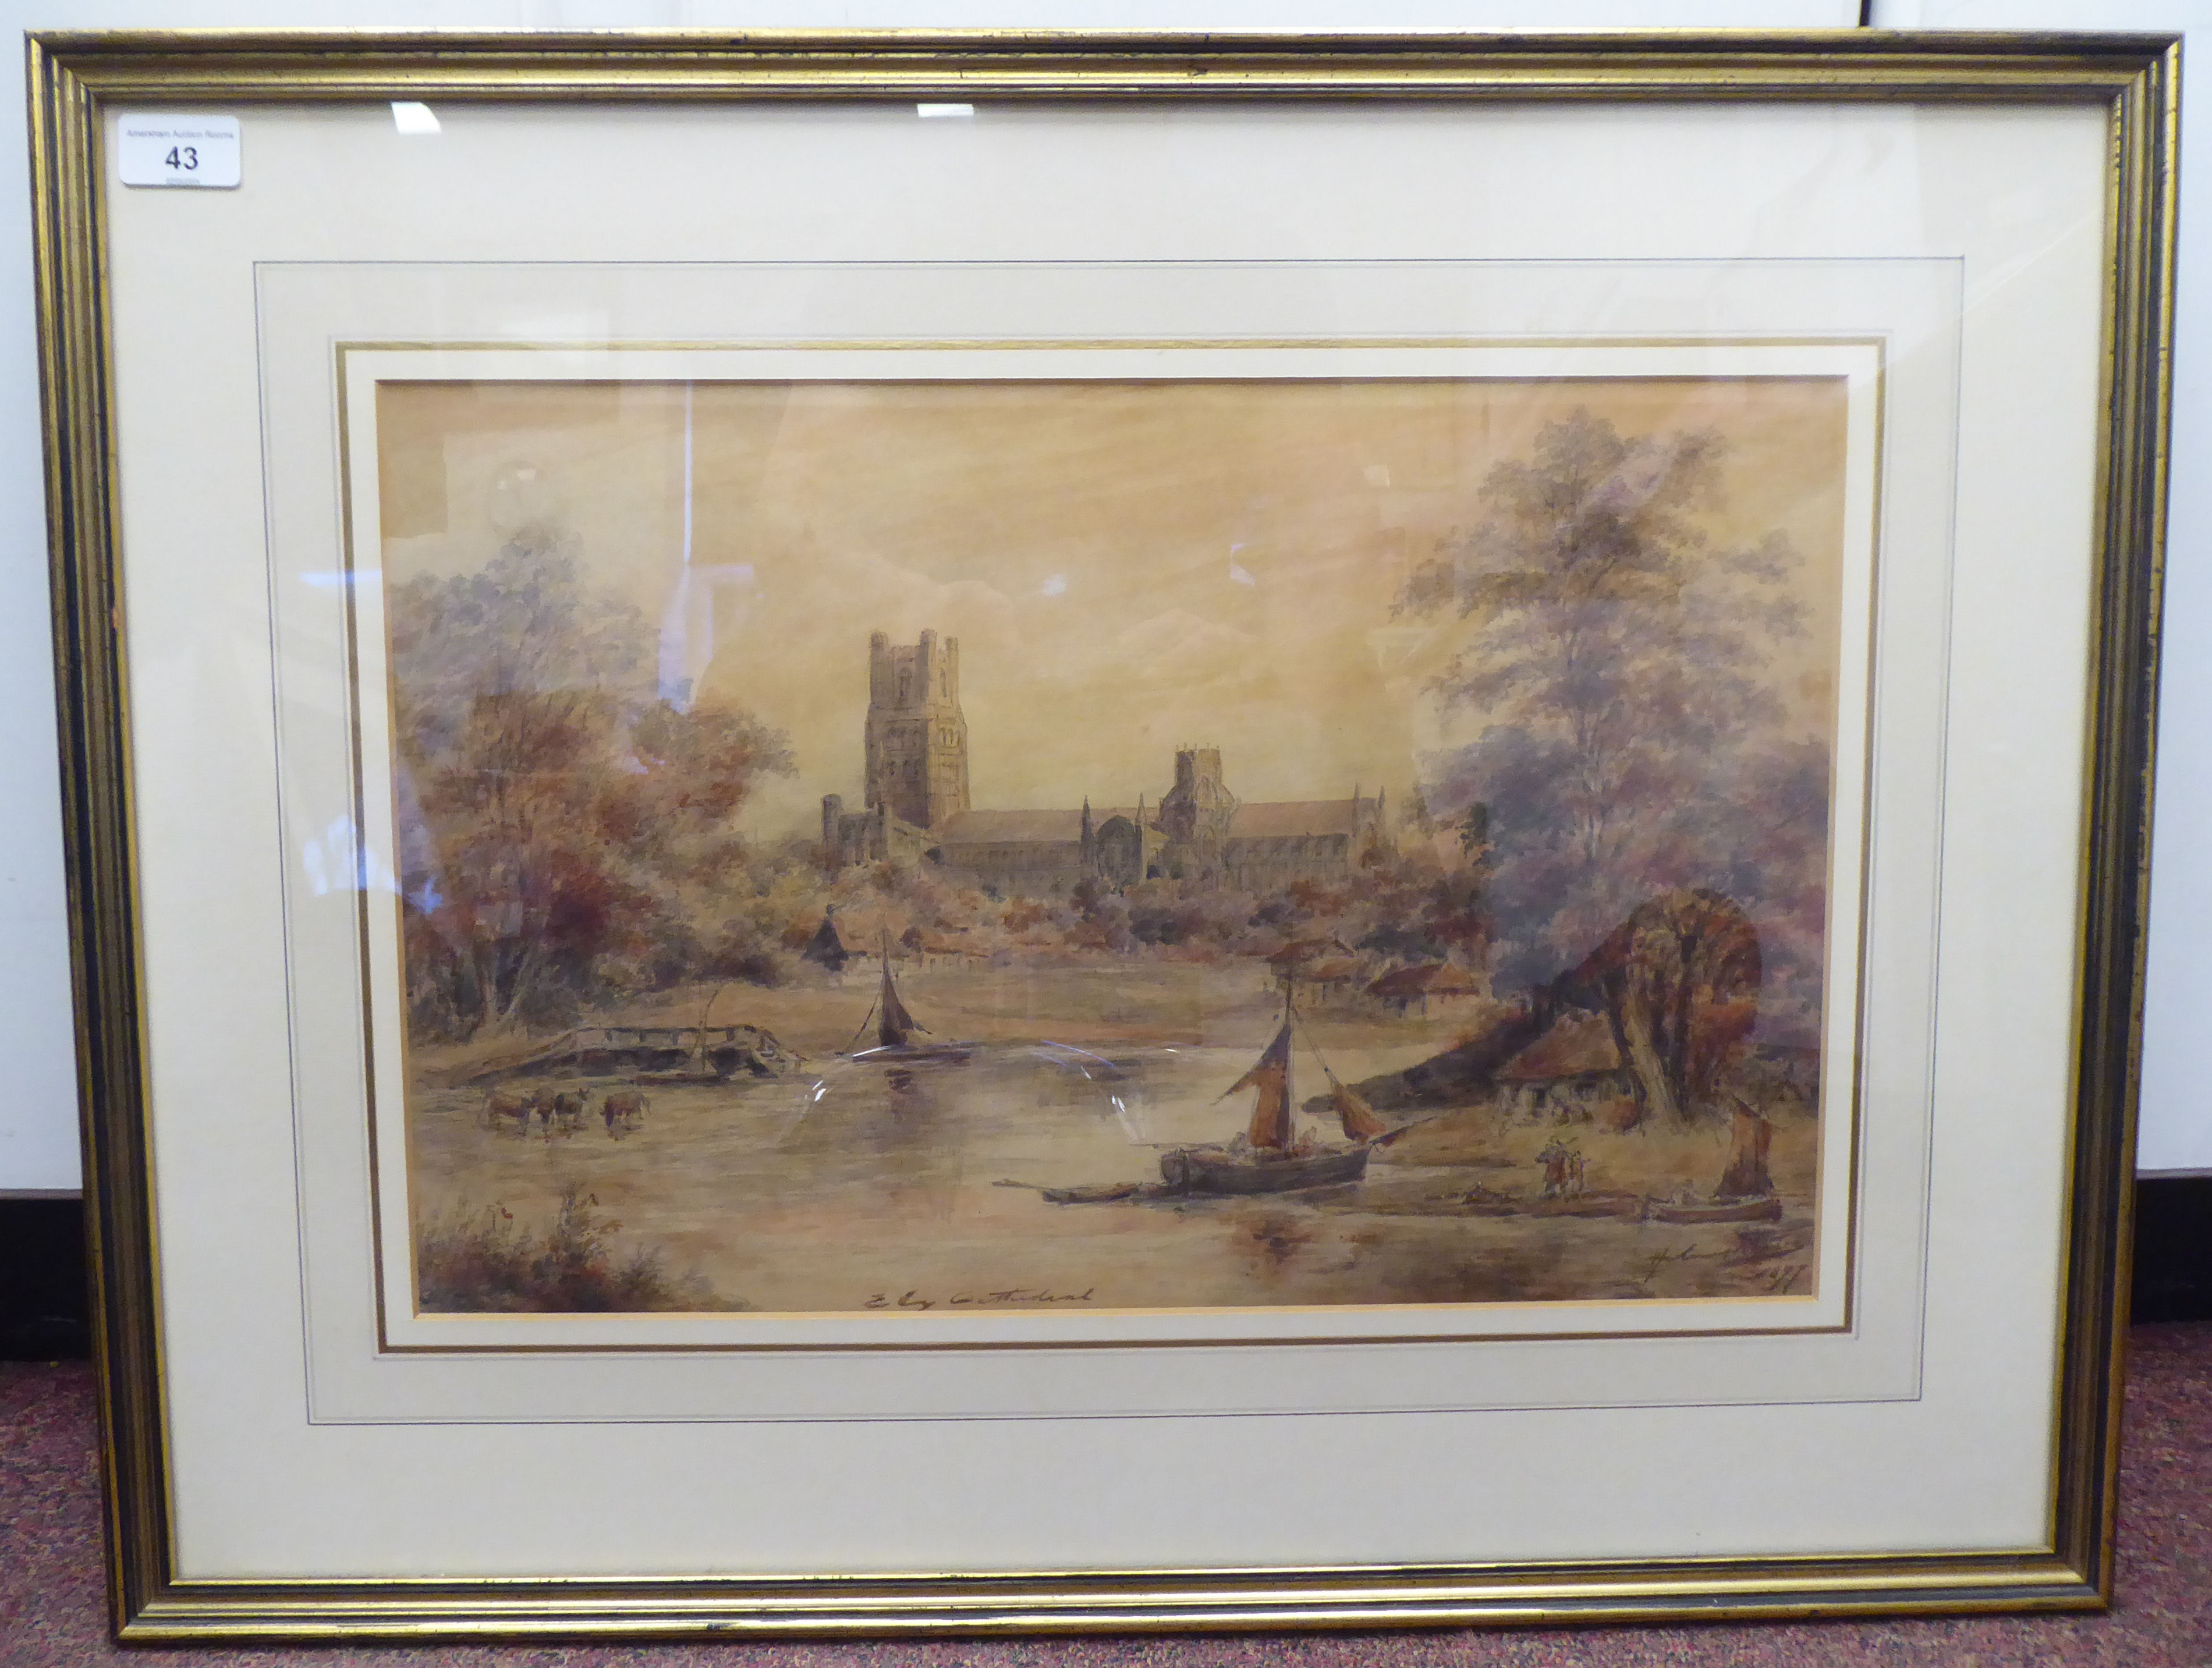 Holmer EC Winter - 'Ely Cathedral'  watercolour  bears an inscription, signature & label verso